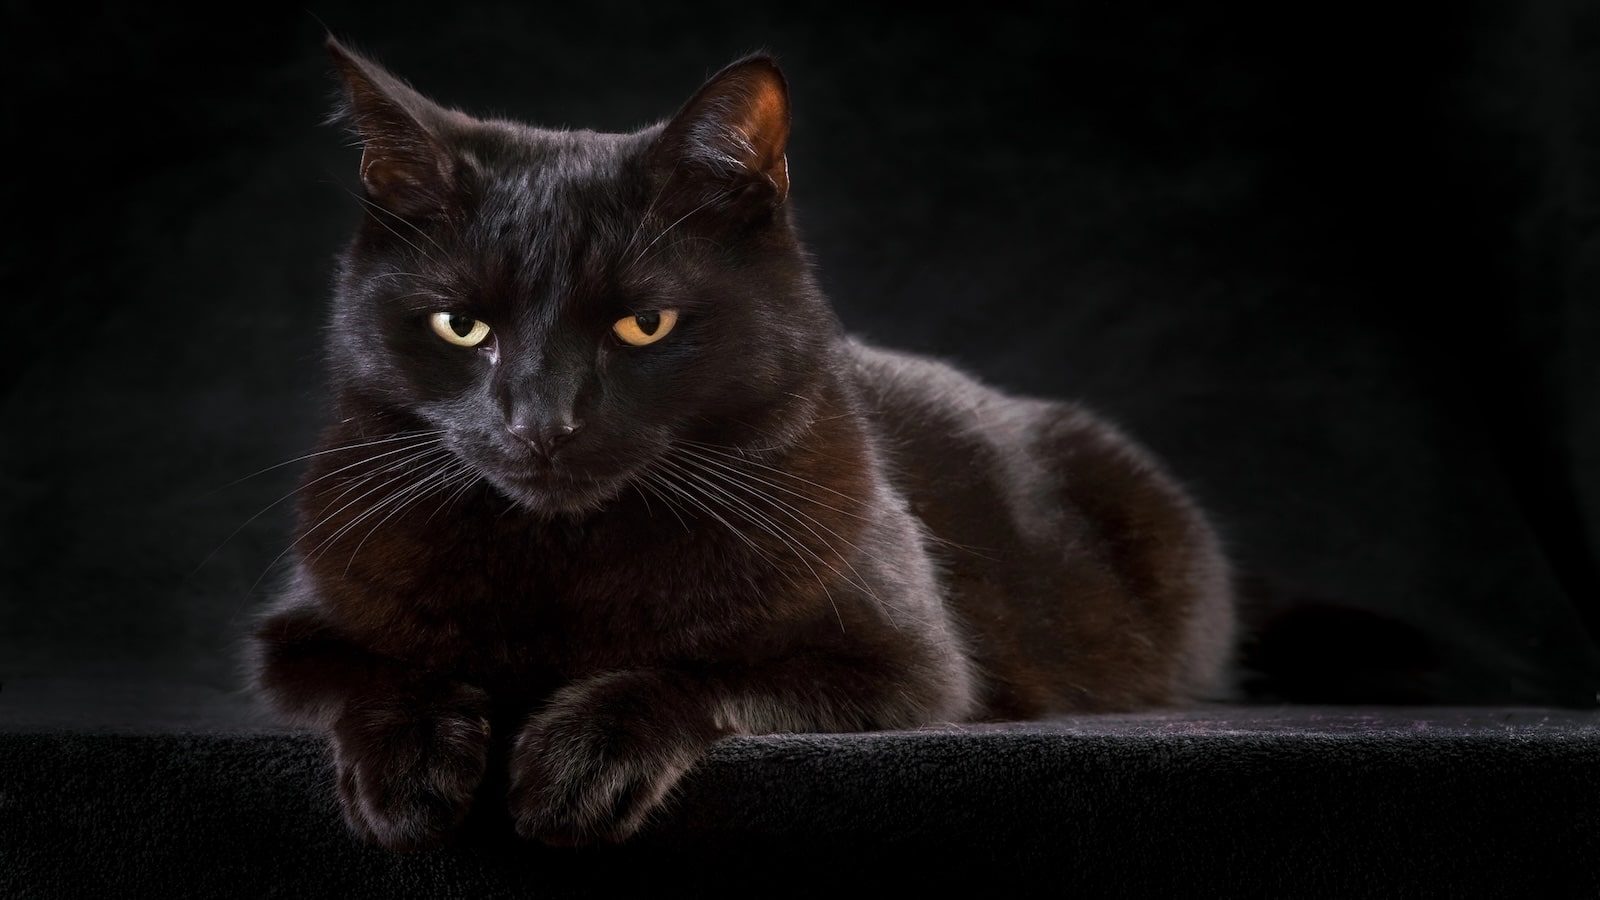 <p><span>In medieval Europe, black cats were often associated with witchcraft and dark omens, leading to widespread mistrust and persecution. Modern attitudes toward black cats vary significantly, with some cultures still viewing them as harbingers of bad luck, while in others, they are beloved pets celebrated especially on Halloween for their spooky connotations.</span></p>